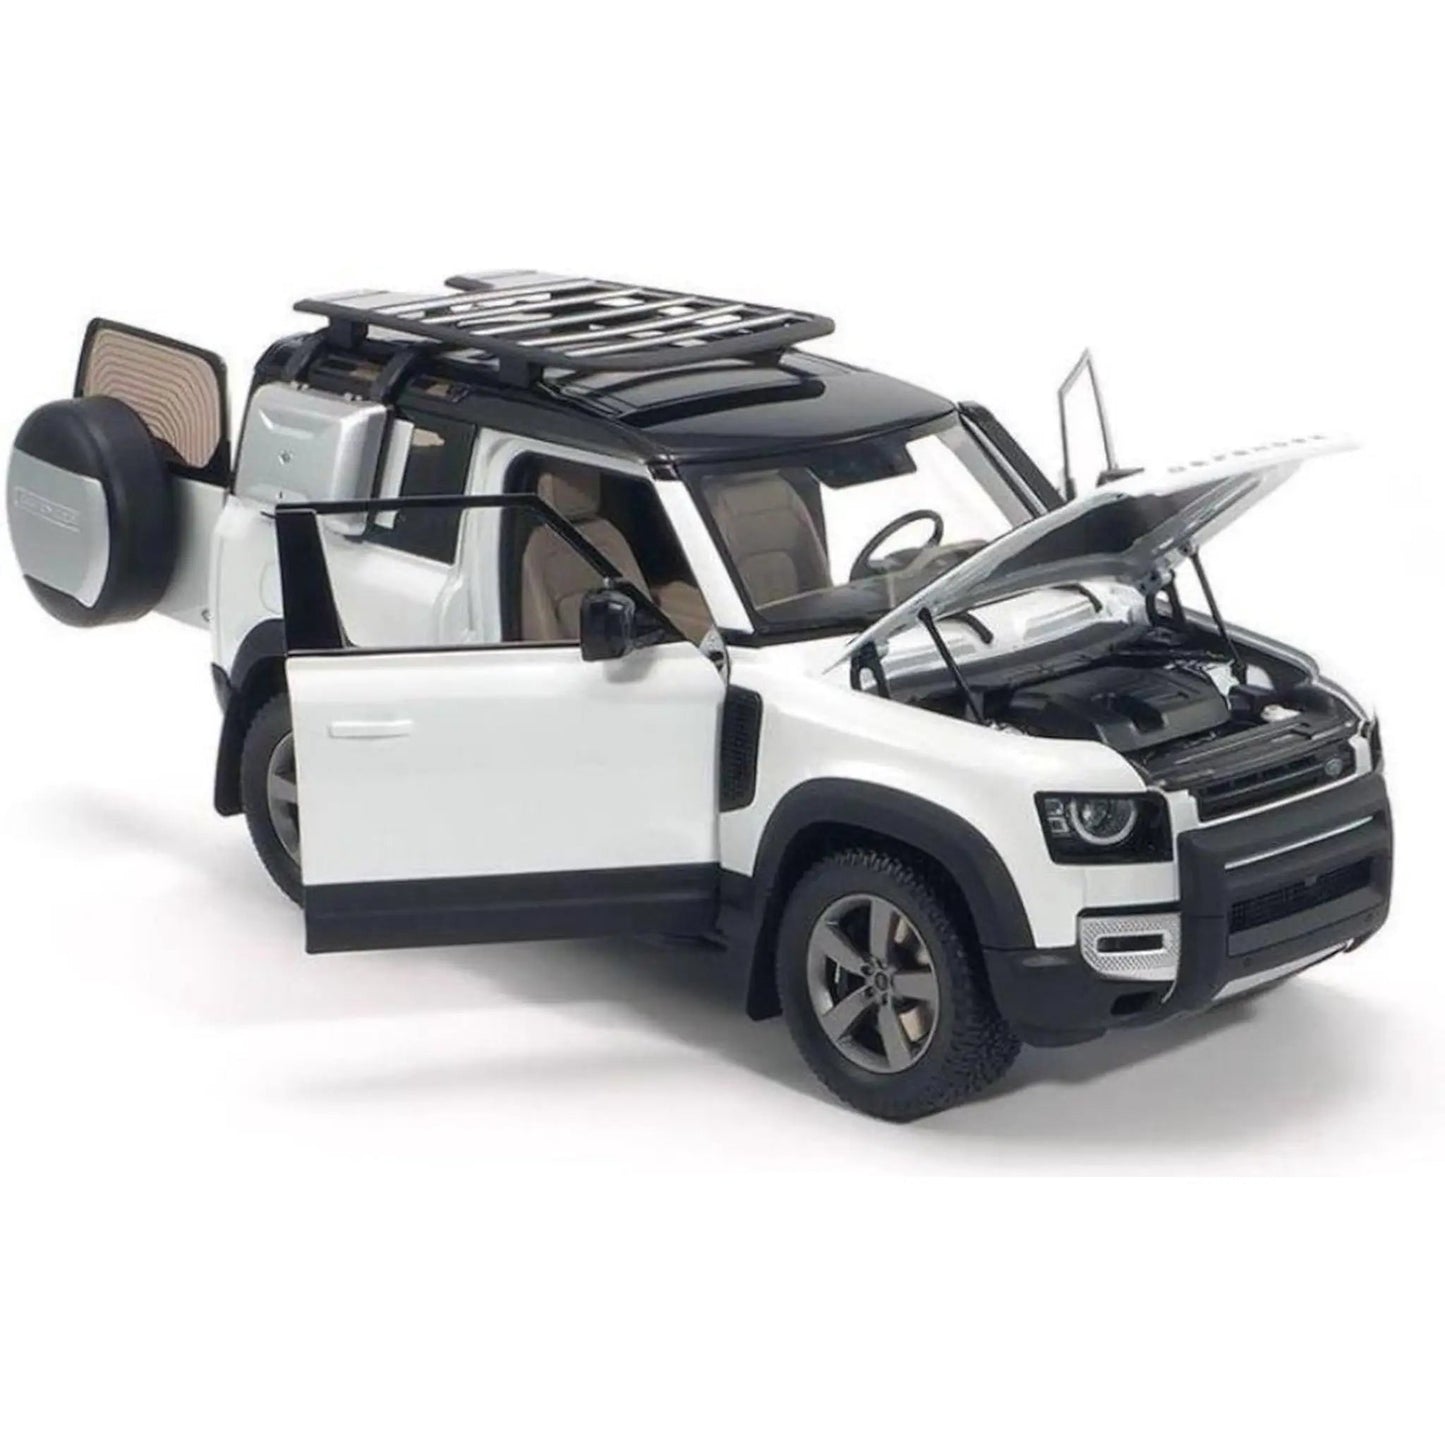 Land Rover Defender 90 2020 With Roof Pack Fuji White Almost Real 1/18 - ALM810707